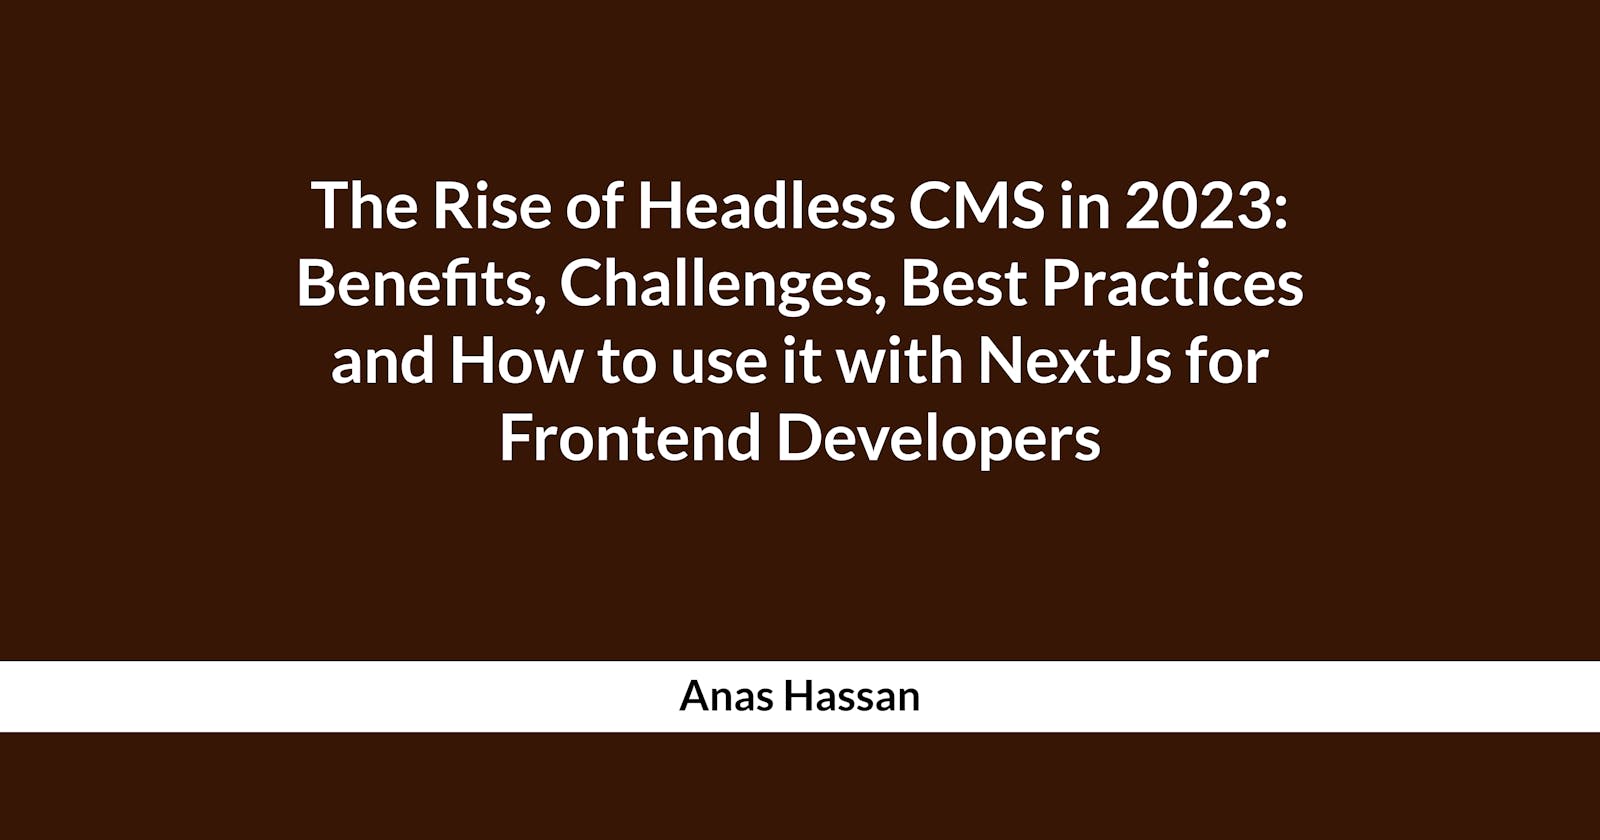 The Rise of Headless CMS in 2023: Benefits, Challenges, Best Practices and How to use it with NextJs for Frontend Developers